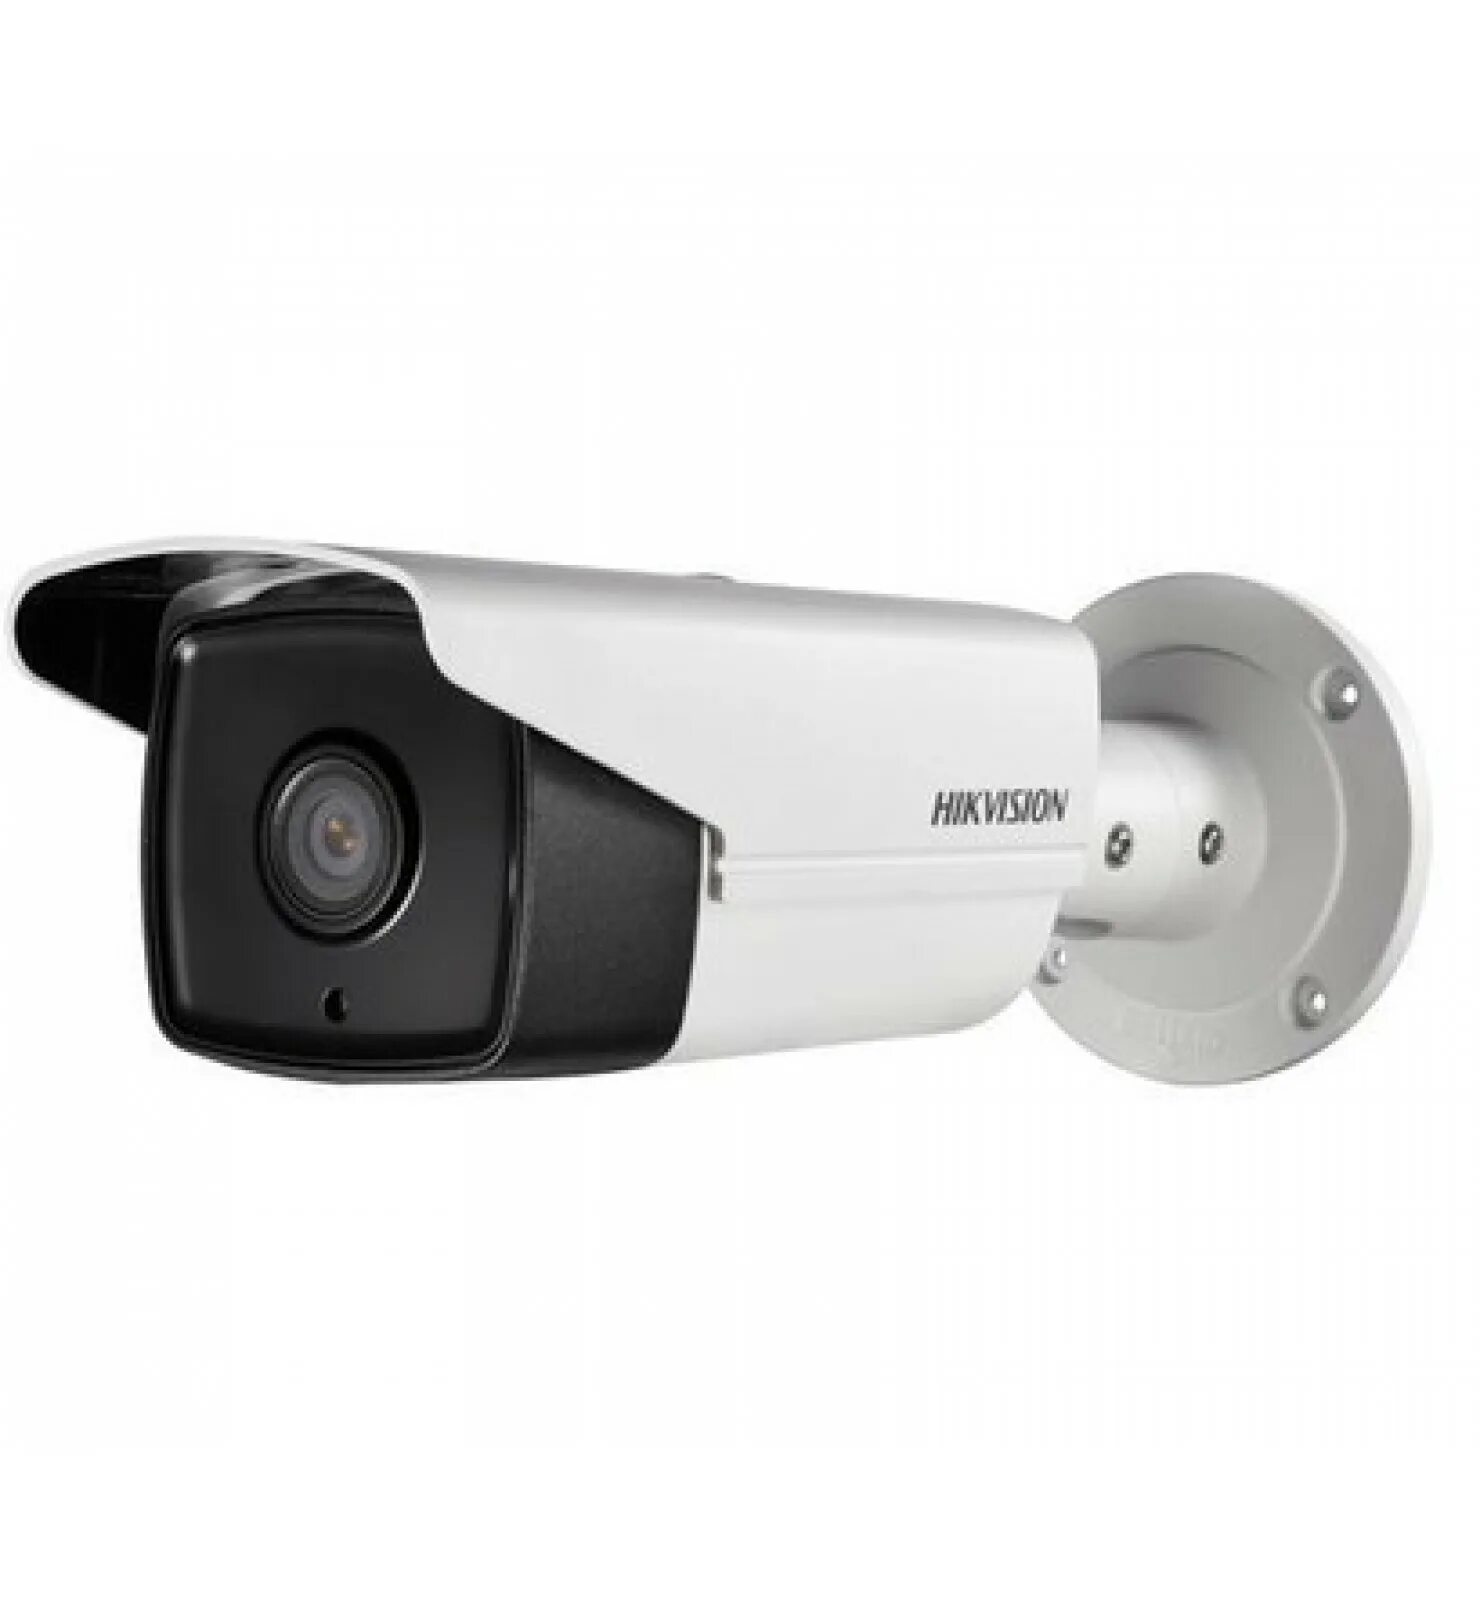 Ds 2de3a404iwg e. DS-2cd4b36fwd-IZS. Hikvision DS-2cd2t42wd-i5. Hikvision DS-2cd2t25fwd-i8 6мм. Видеокамера Hikvision DS-2cd4a25fwd-IZHS.